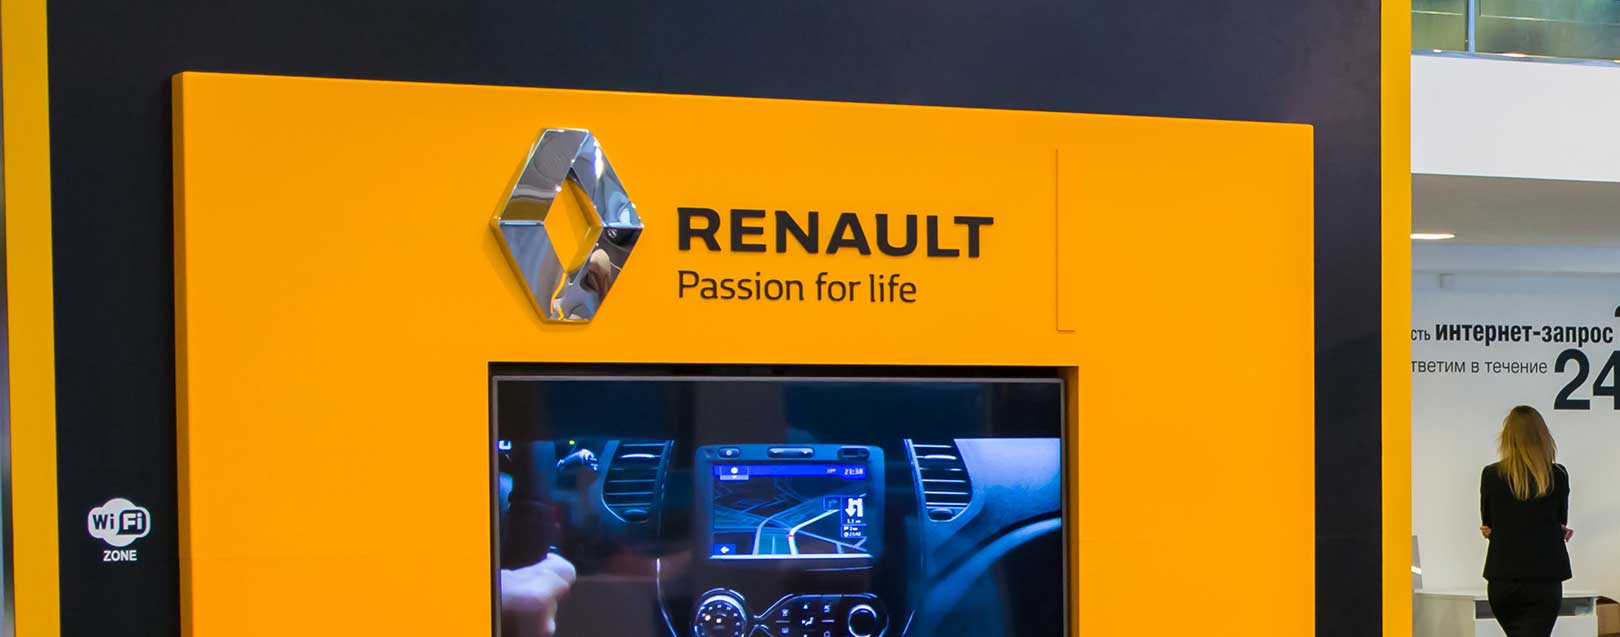 Renault and Iran enter into one of the biggest ever car deals, to produce 150,000 cars